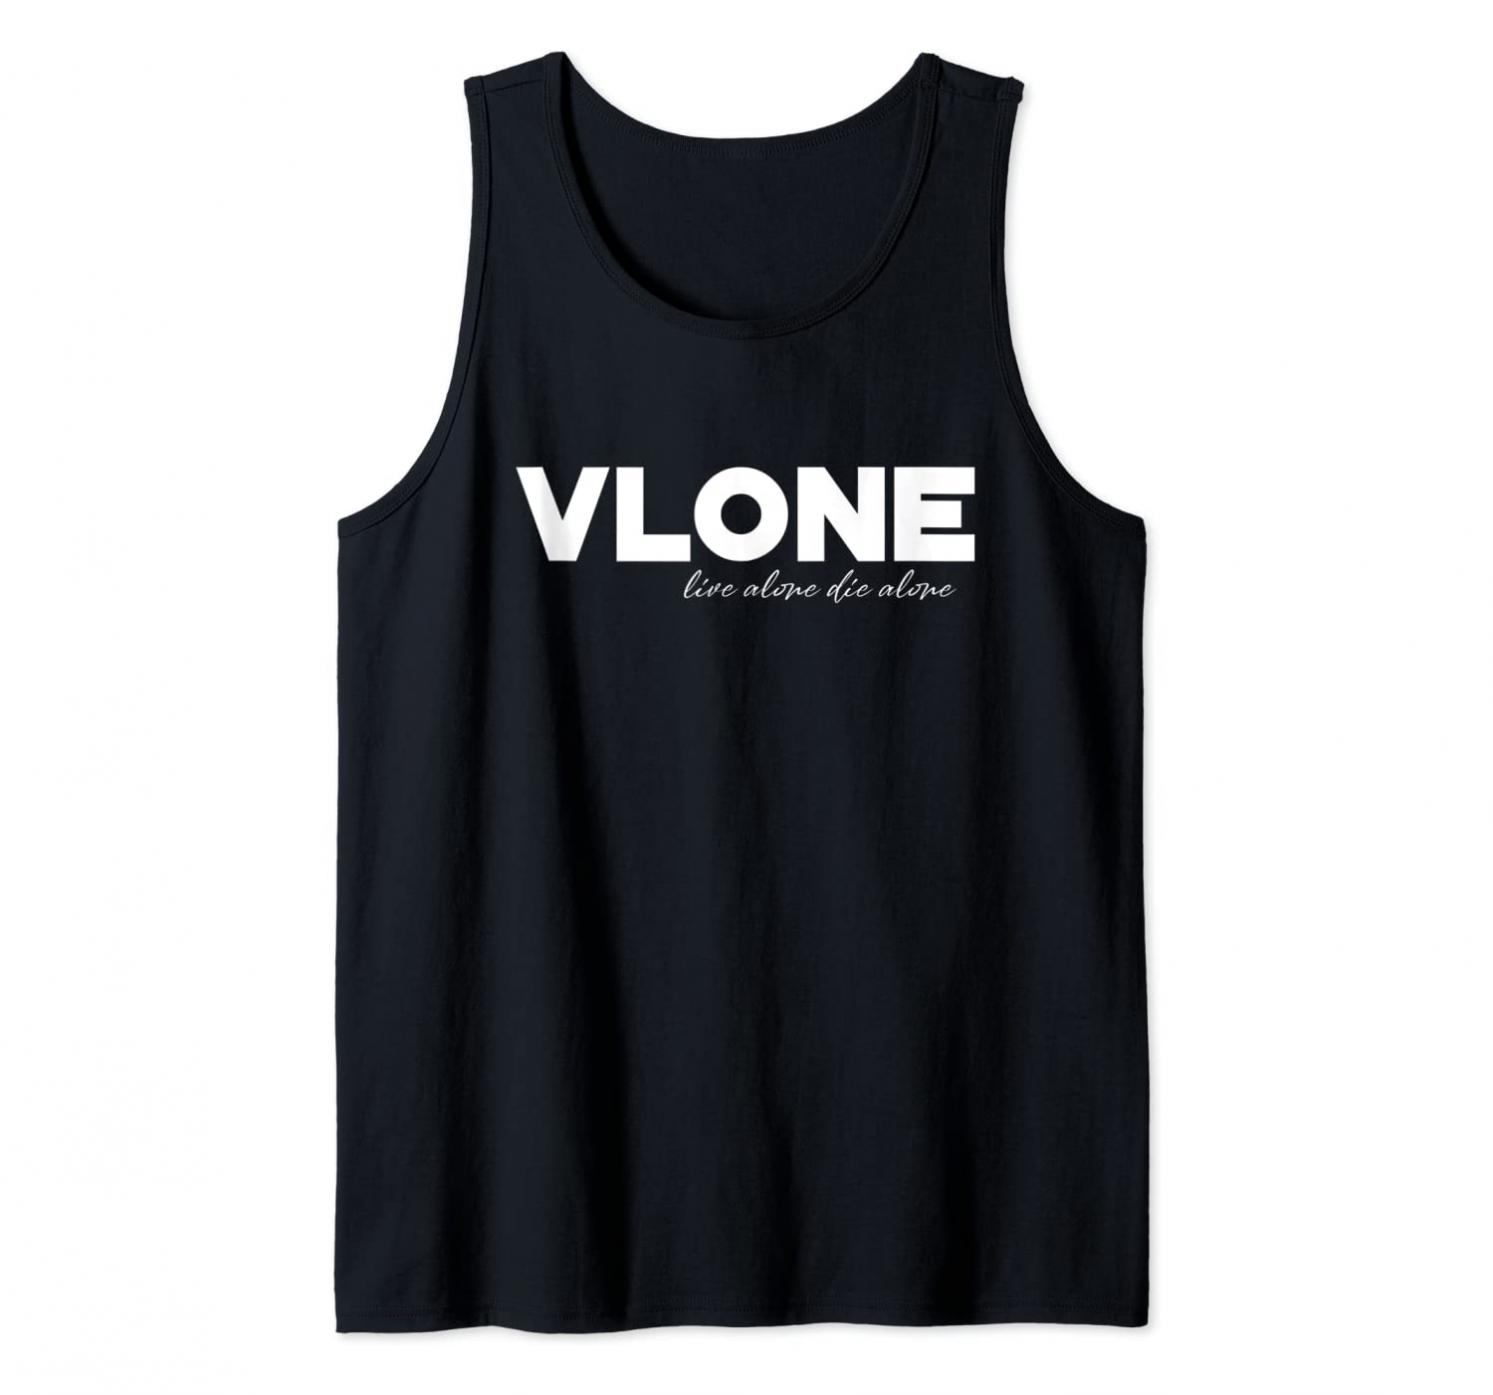 Vlone Is Just A Lifestyle Live Alone Die Alone for men women Tank Top